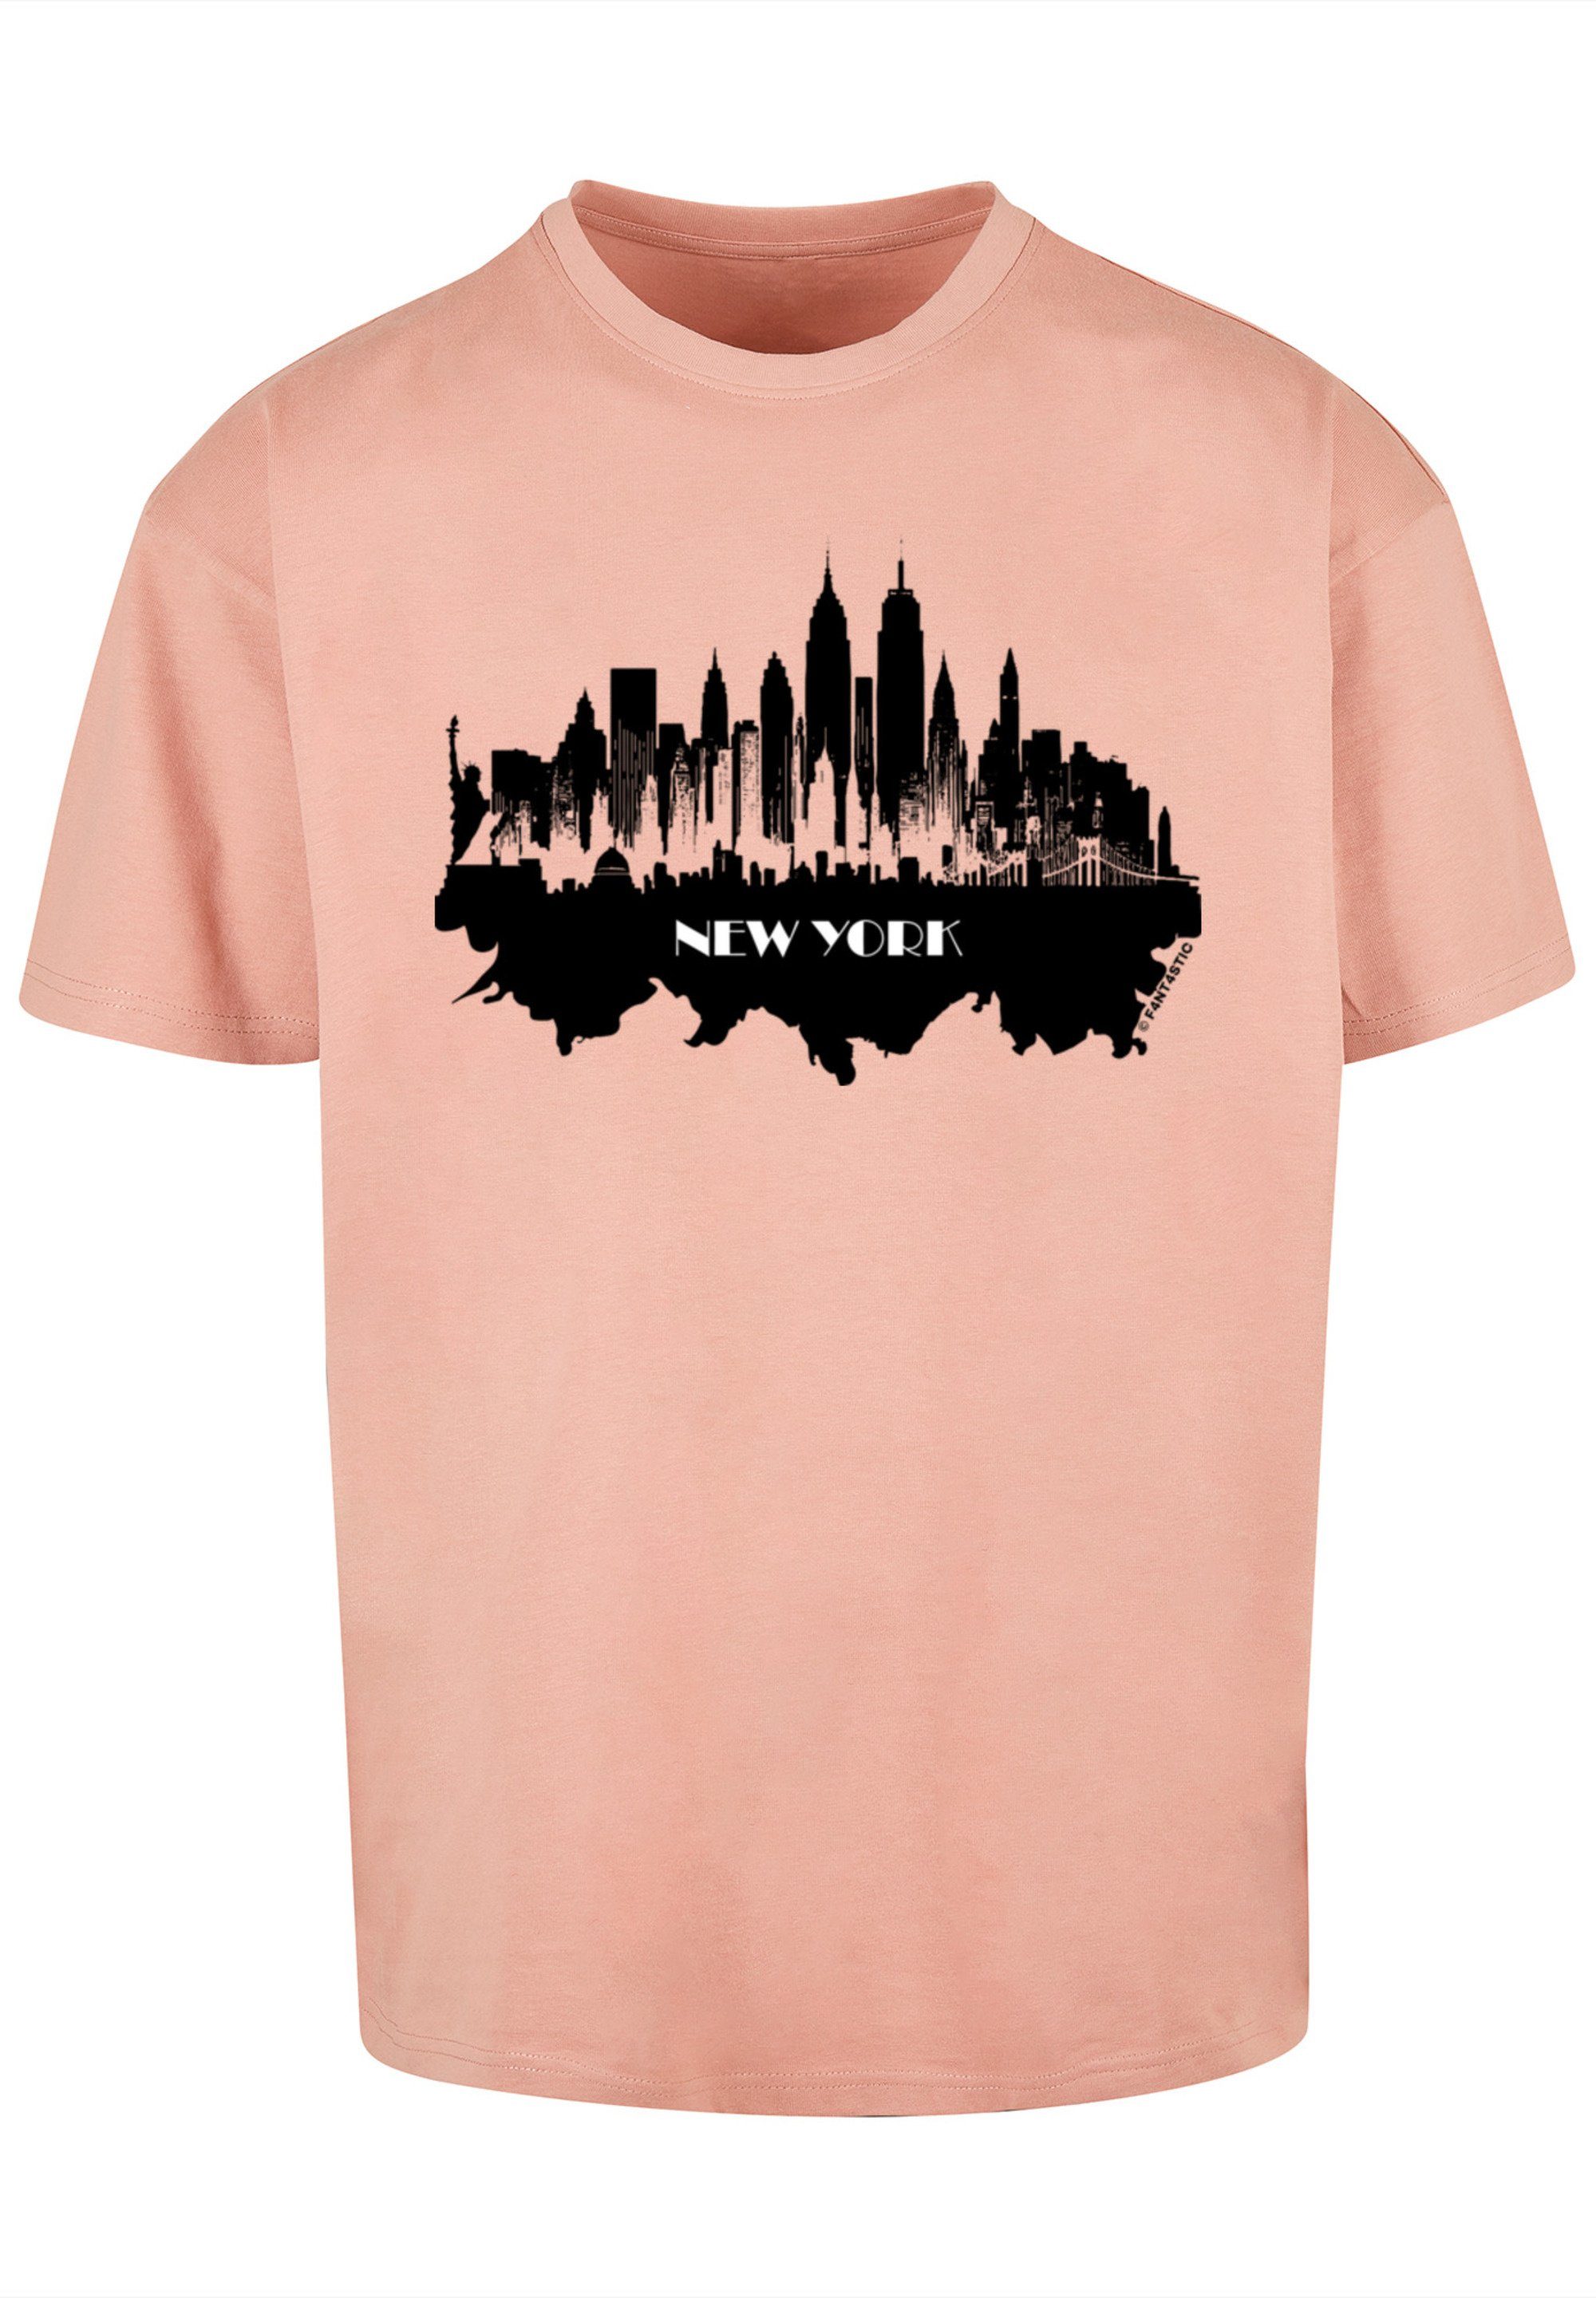 F4NT4STIC T-Shirt Collection - Print York skyline New amber Cities